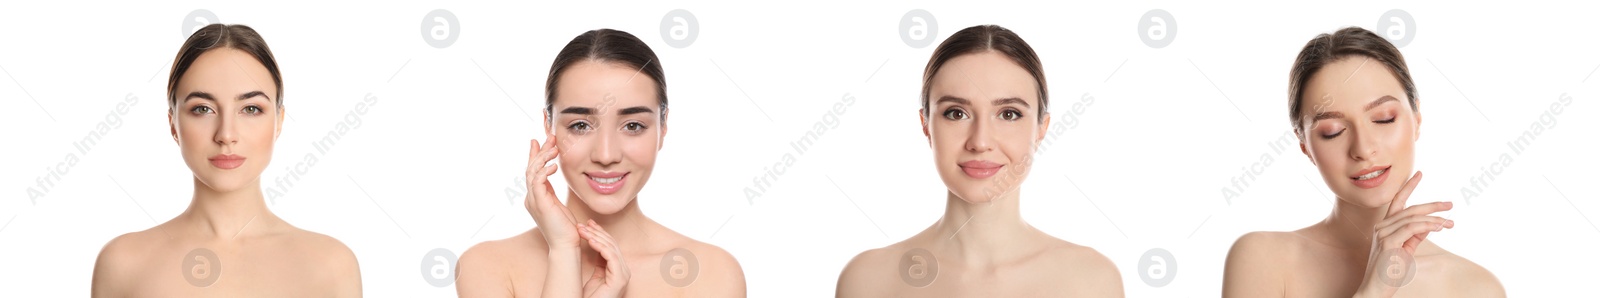 Image of Young beautiful women with perfect skin on white background, collage of portraits. Banner design